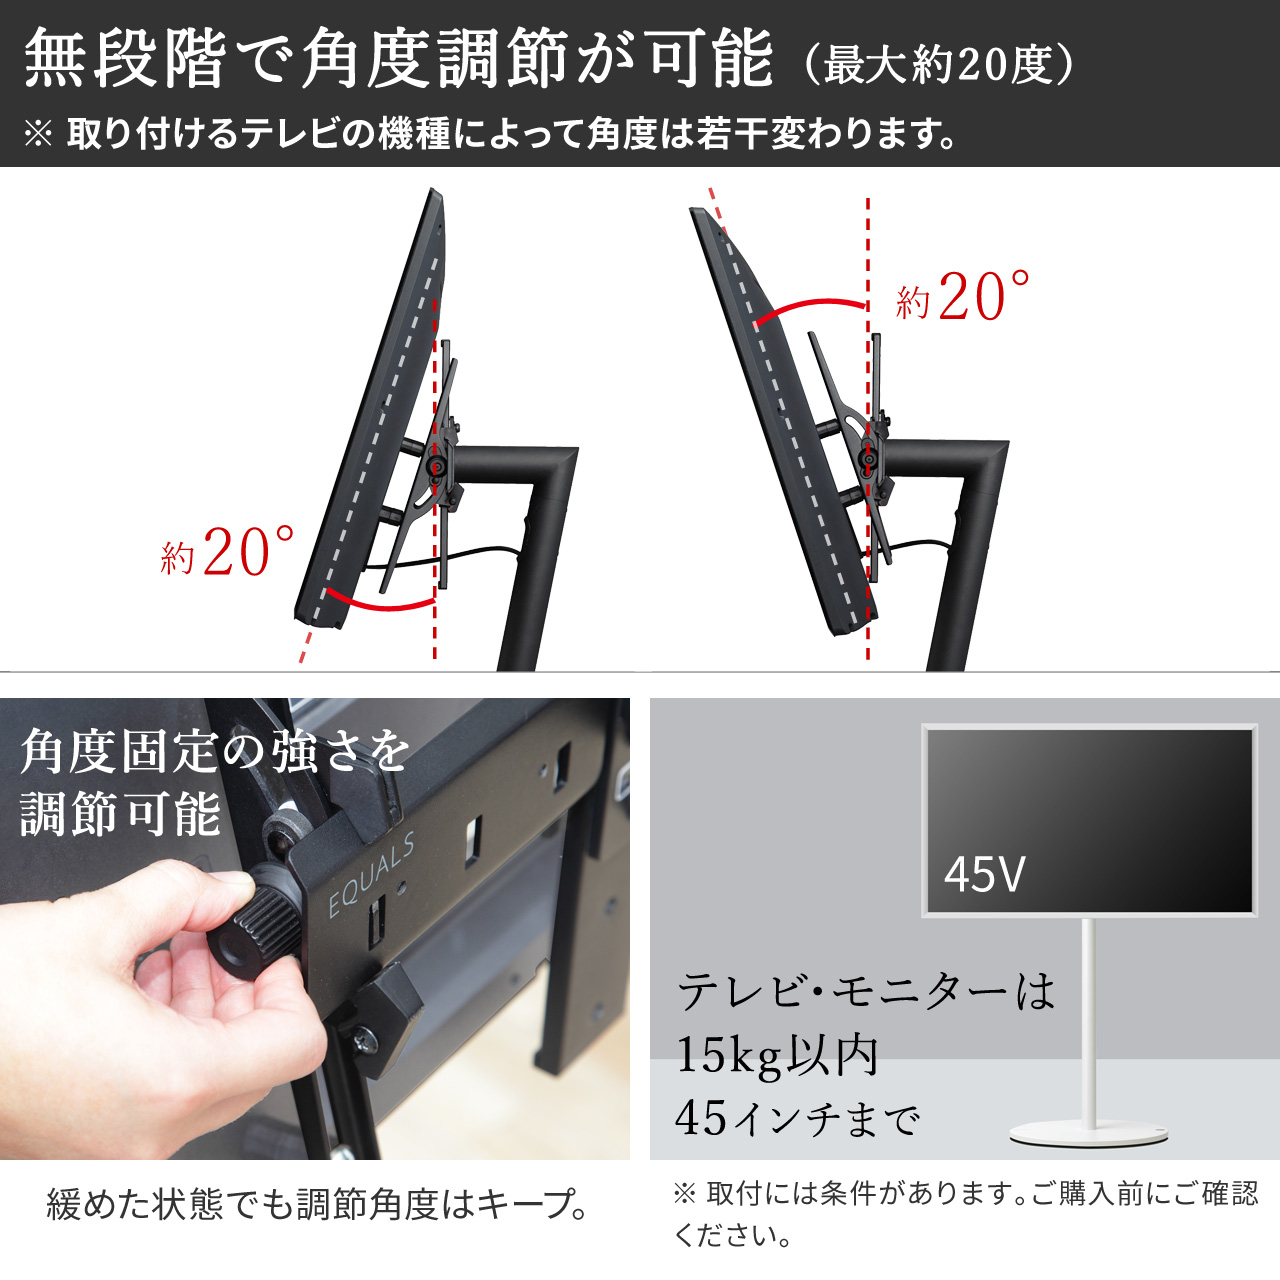 WALL A2用オプション「上下角度調整ブラケット」販売のお知らせ